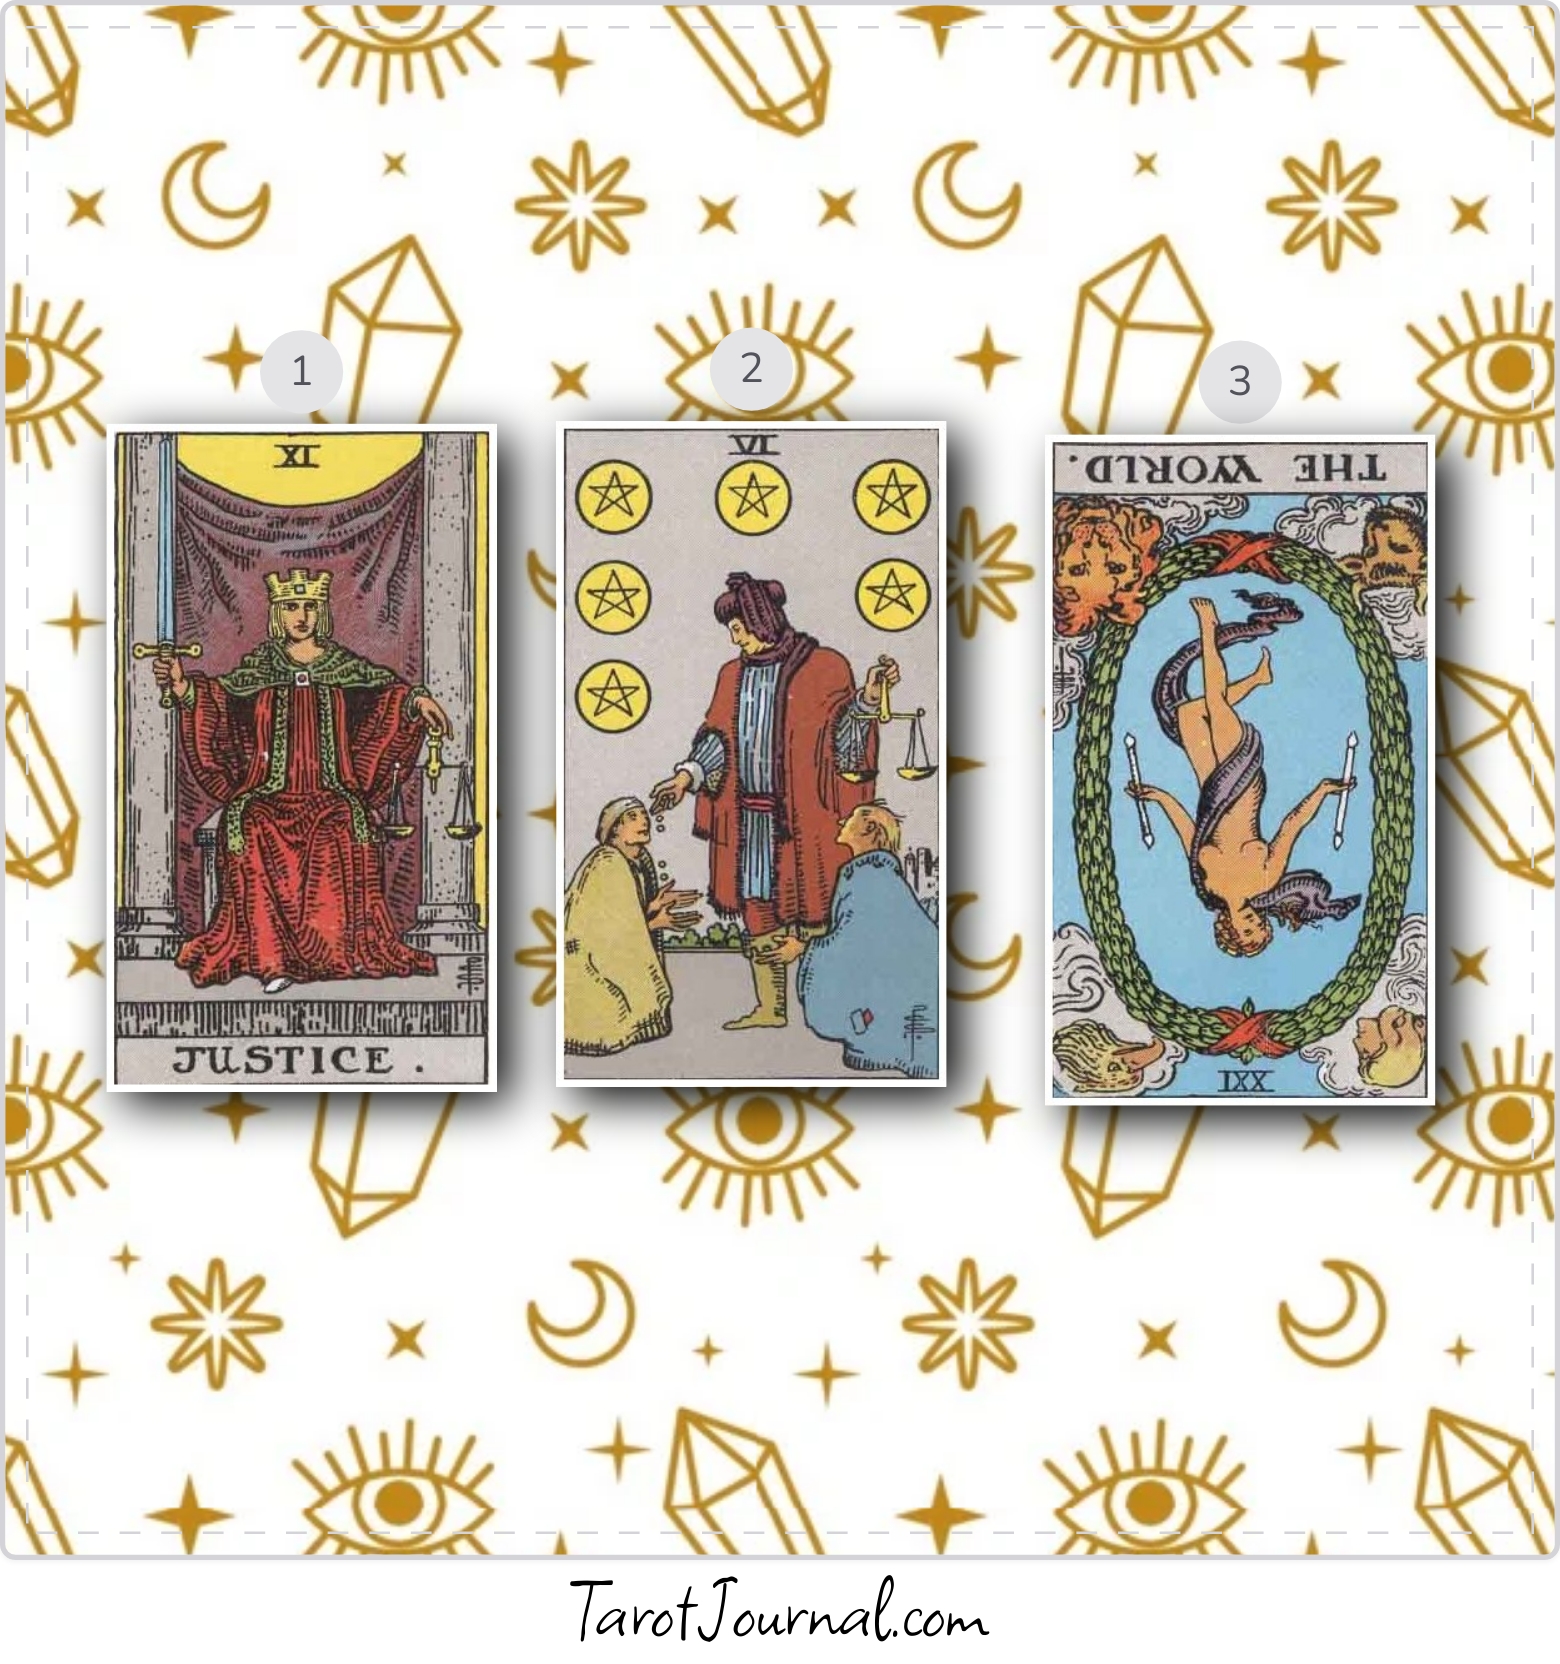 What have I learned from our past to continue in our present to help shape our future together. - tarot reading by Janice